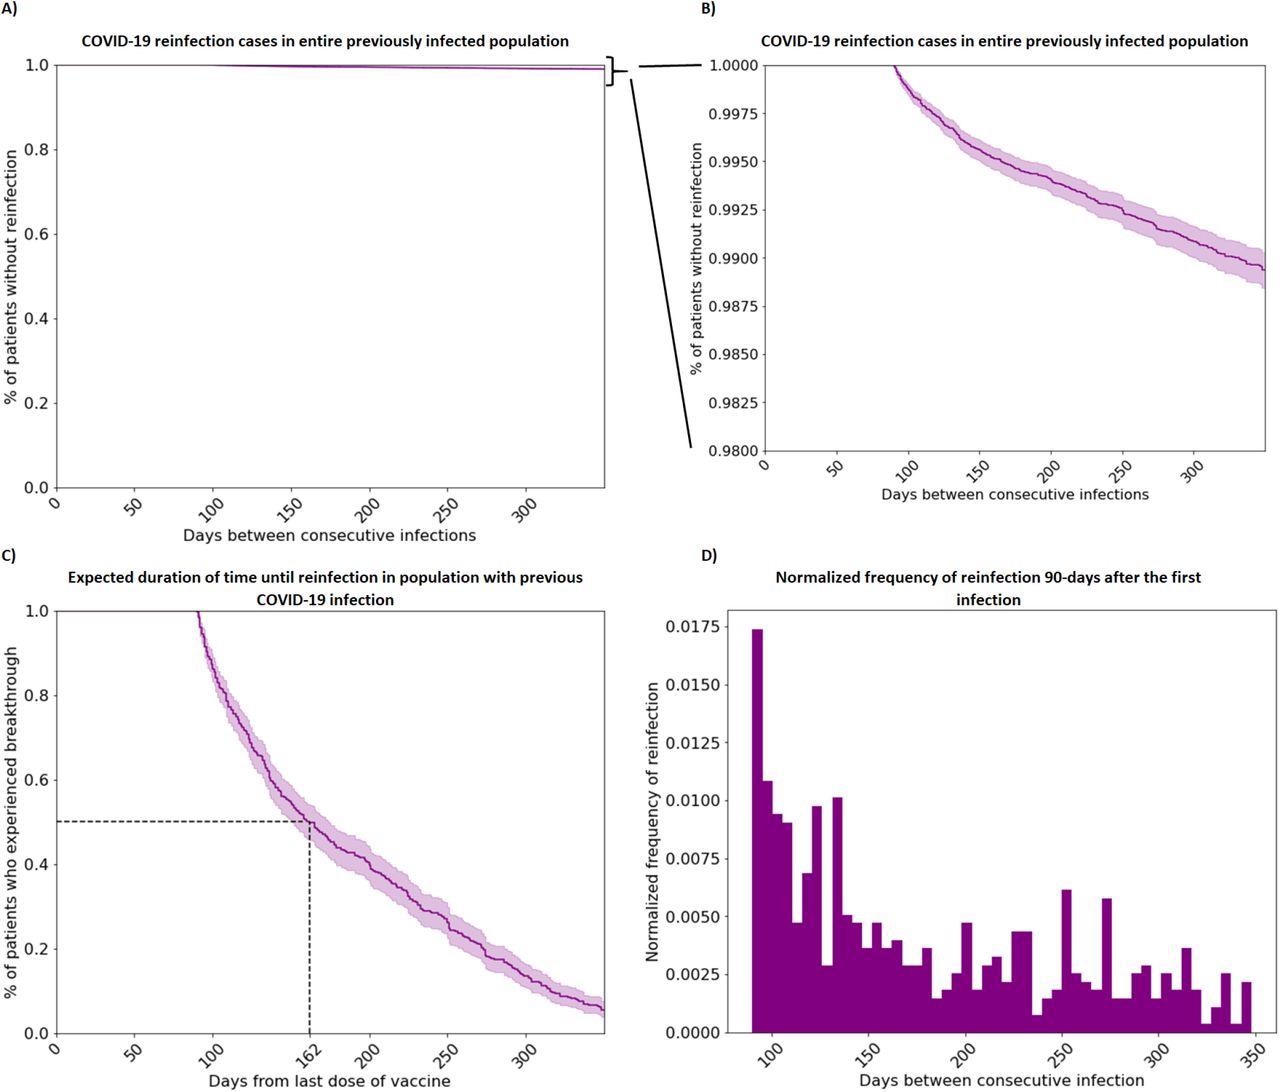 (A) Kaplan-Meier estimates for the survival function for infection-induced immunity. Reinfection is defined by a positive COVID-19 PCR or NAAT test 90 days after the previous positive test. Range for the X axis extends to 600+ days, but only 350 days is displayed for controlled comparison with the vaccinated cohort (y-axis[0,1]). (B) More detailed close-up view of A, (y-axis[0.98,1]) (C) Kaplan-Meier estimates for the survival function restricted to patients who have been reinfected. ∼5% of reinfected patients had more than 350 days between infections. (D) Normalized frequency of reinfection 9 months after the first infection.